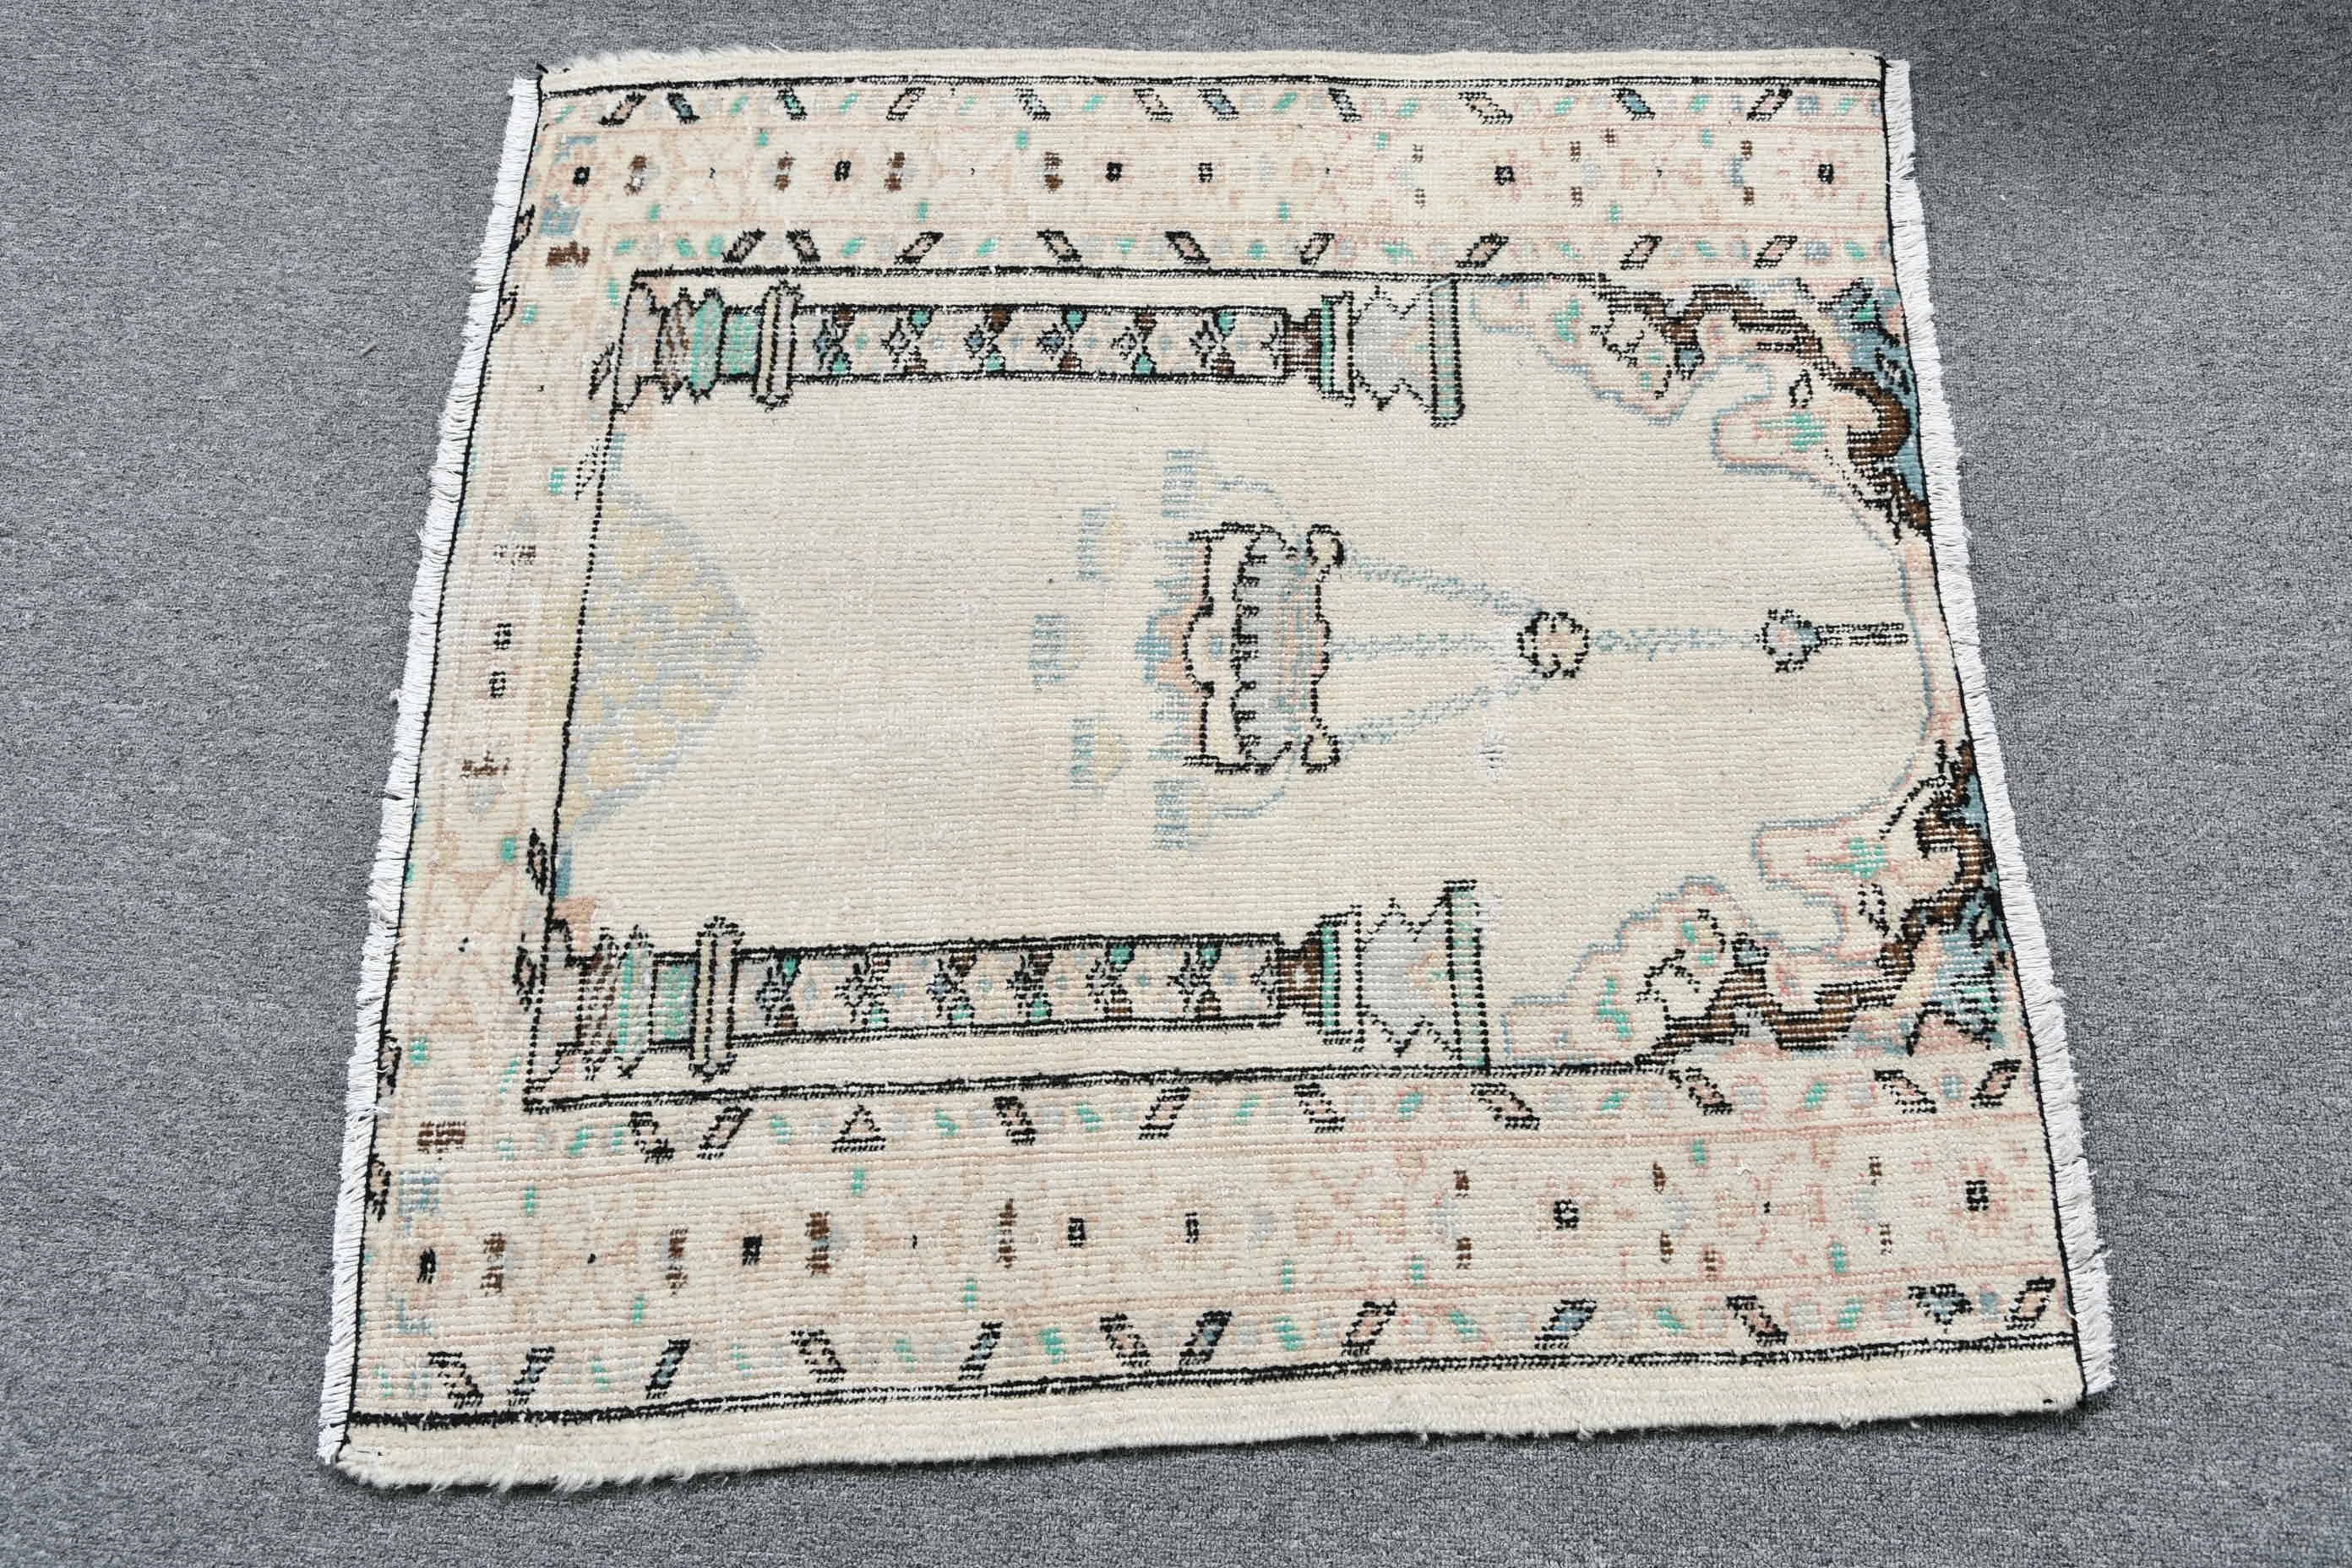 Beige Moroccan Rug, Entry Rugs, Vintage Rugs, Car Mat Rug, Decorative Rugs, Kitchen Rug, Turkish Rug, Antique Rug, 2.9x2.8 ft Small Rugs